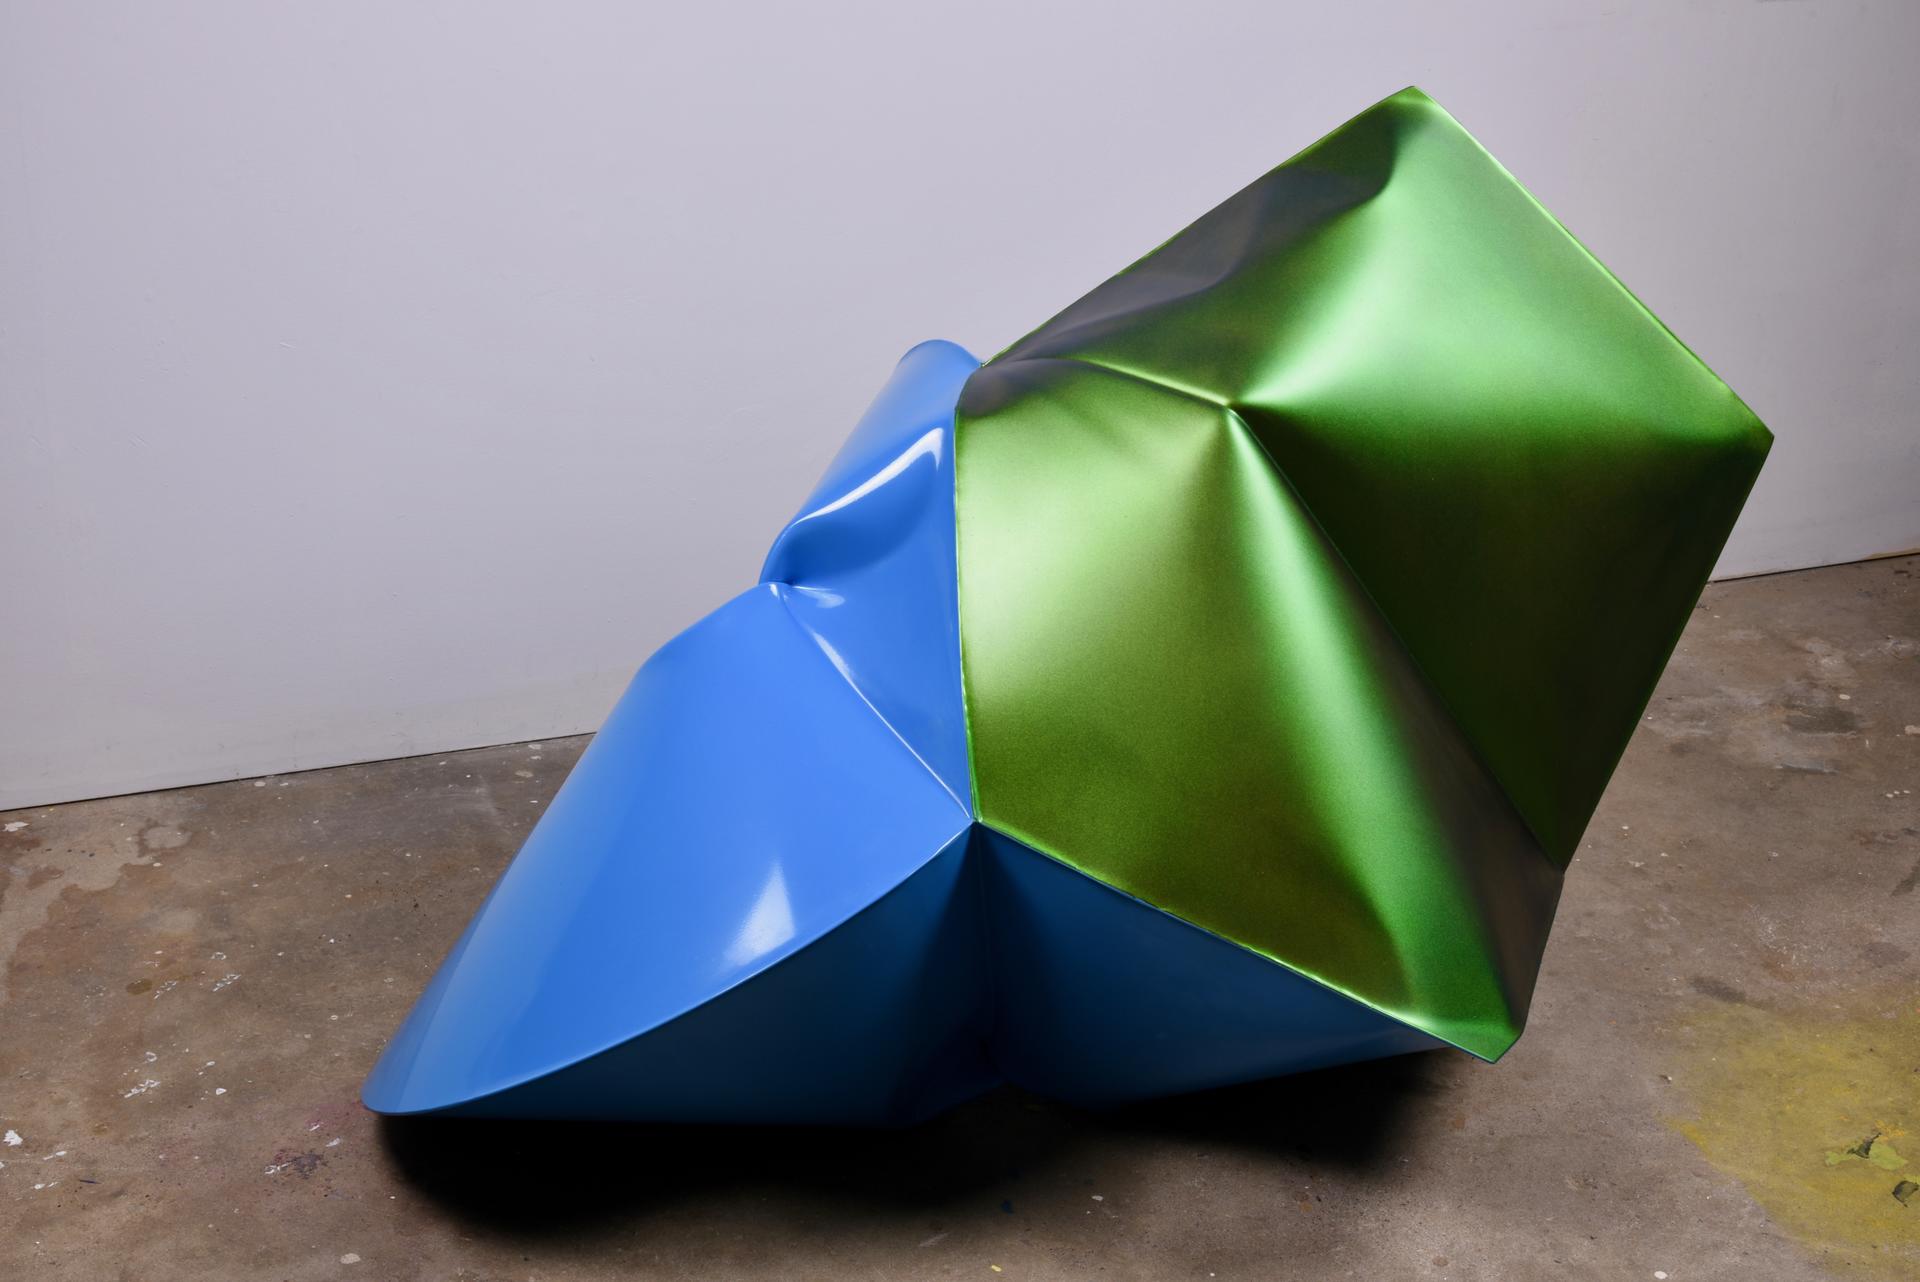 Jeremy Thomas, Ford Blue, 2021, Cold rolled steel, powder coat and urethane, 87.6 x 83.8 x 132 cm